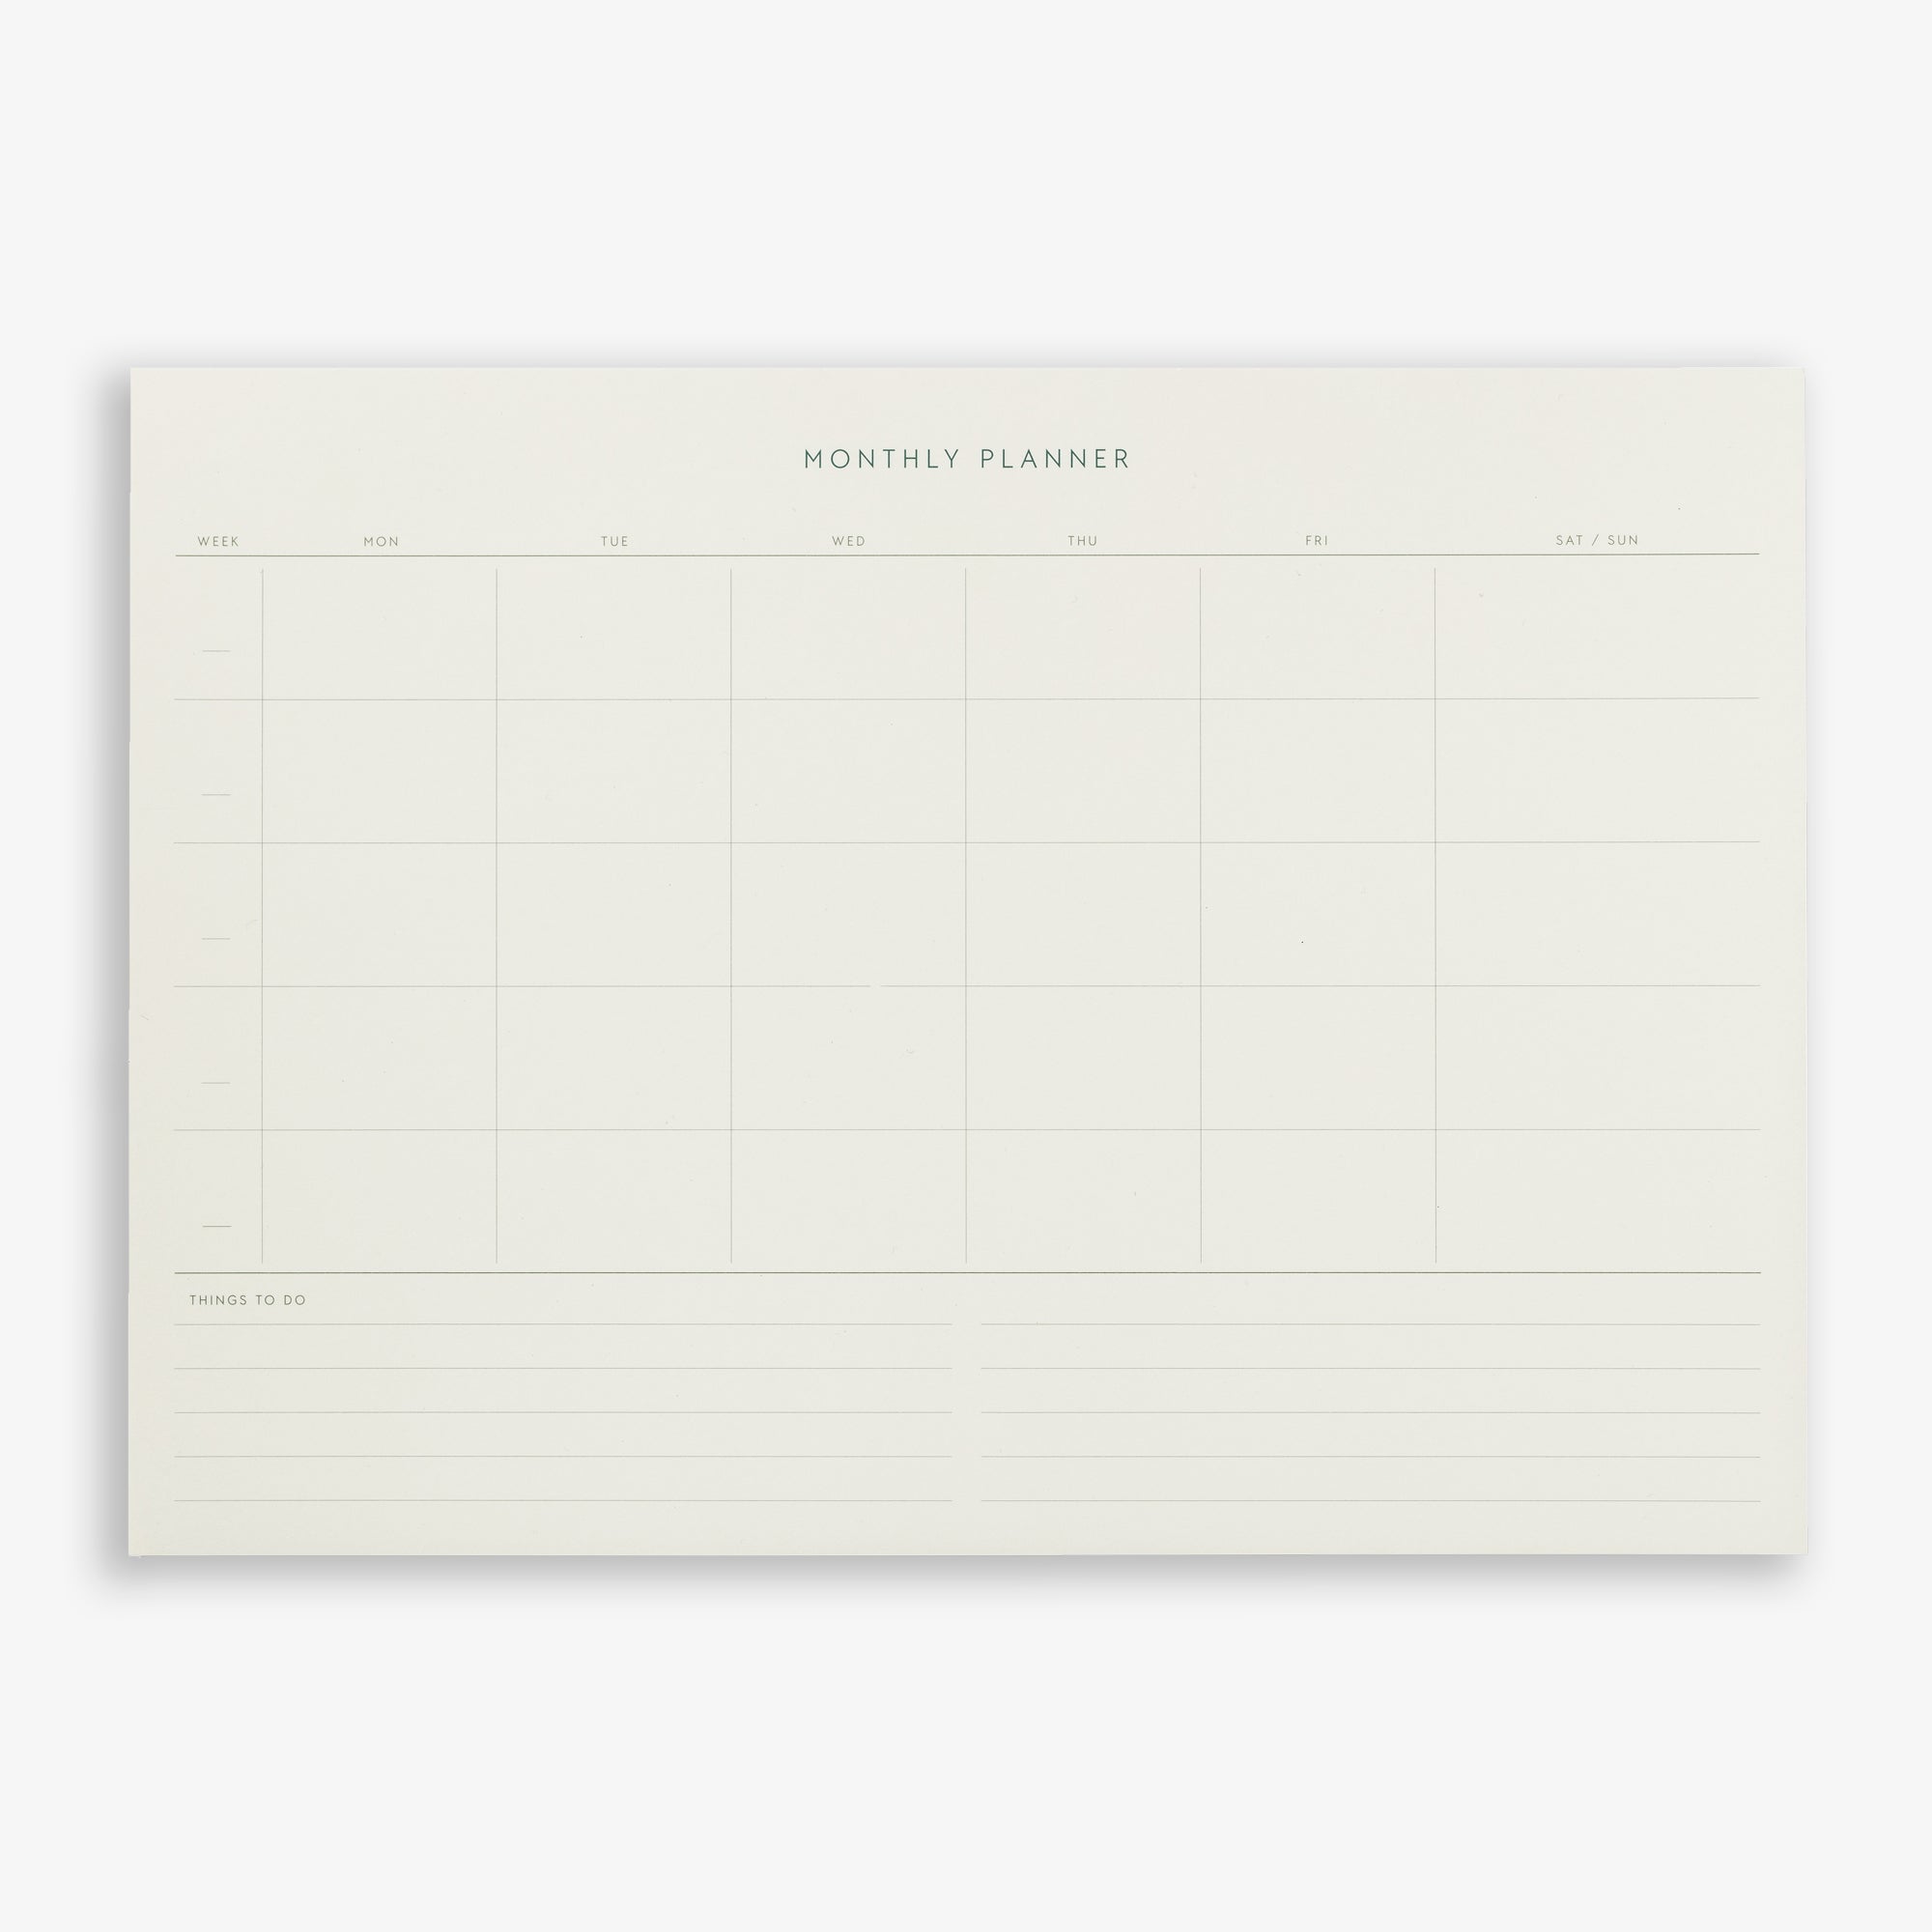 MONTHLY PLANNER NOTEPAD // A4